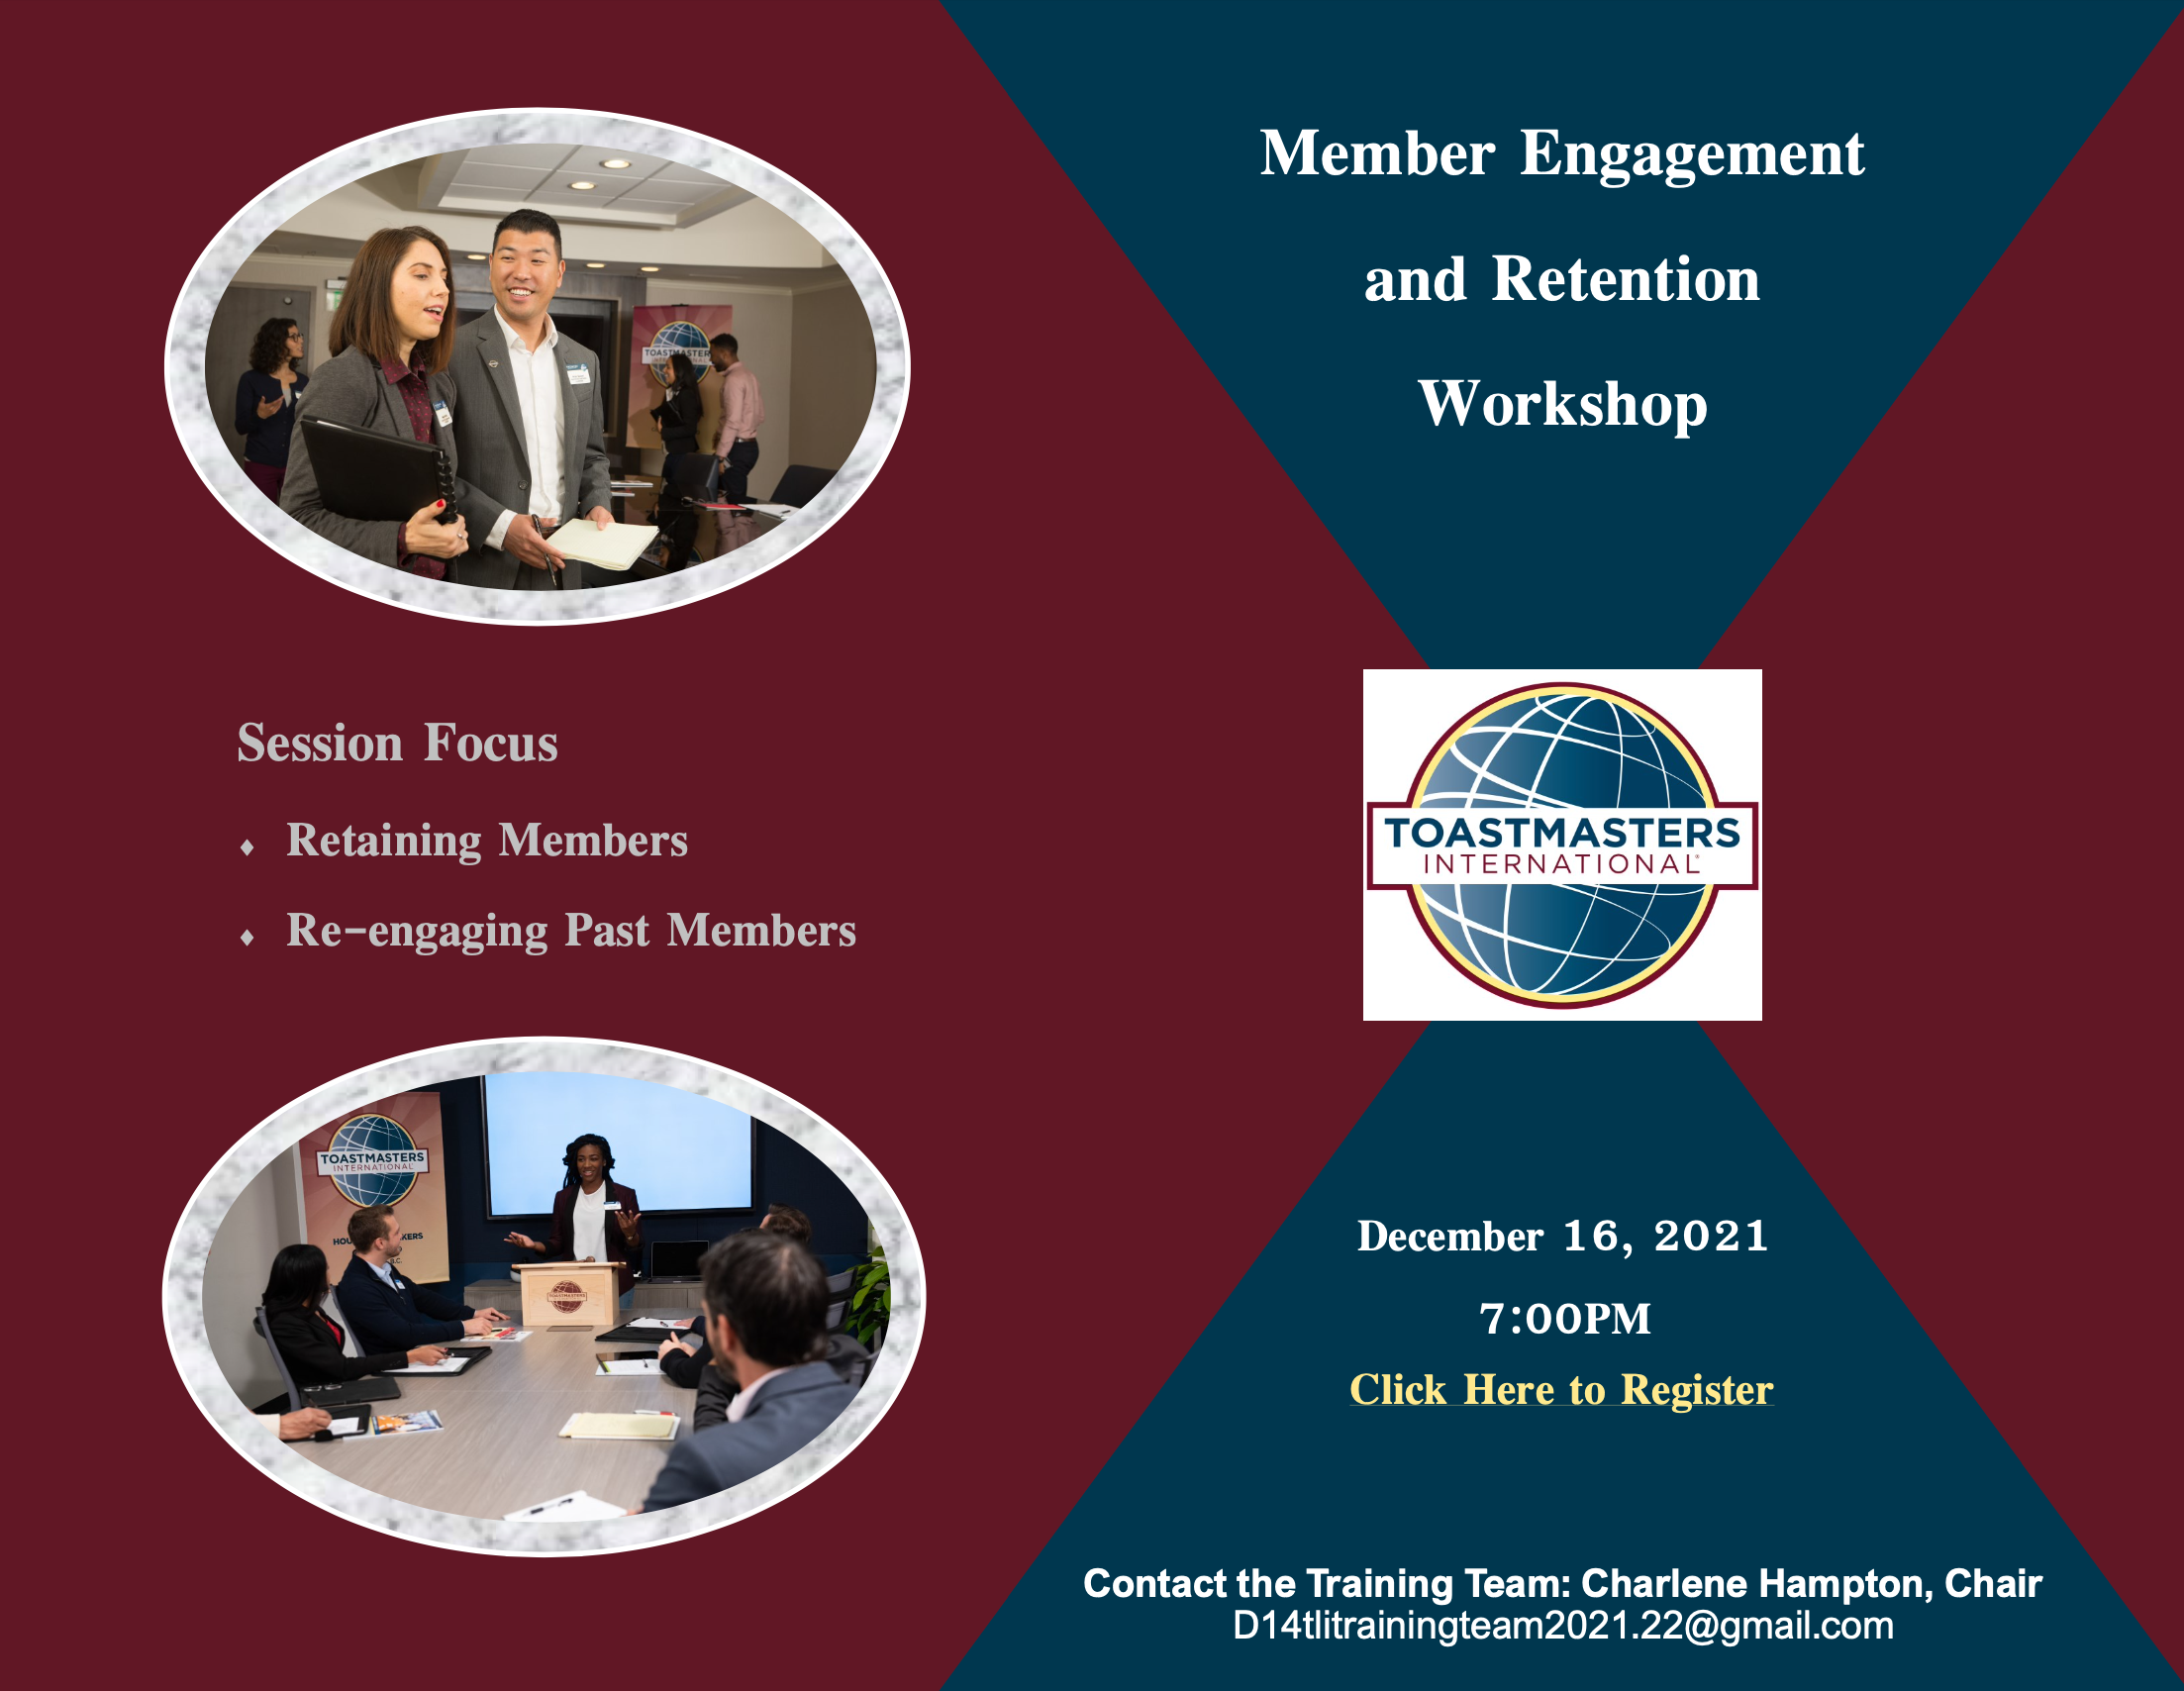 Member Engagement and Retention 12-16-2021